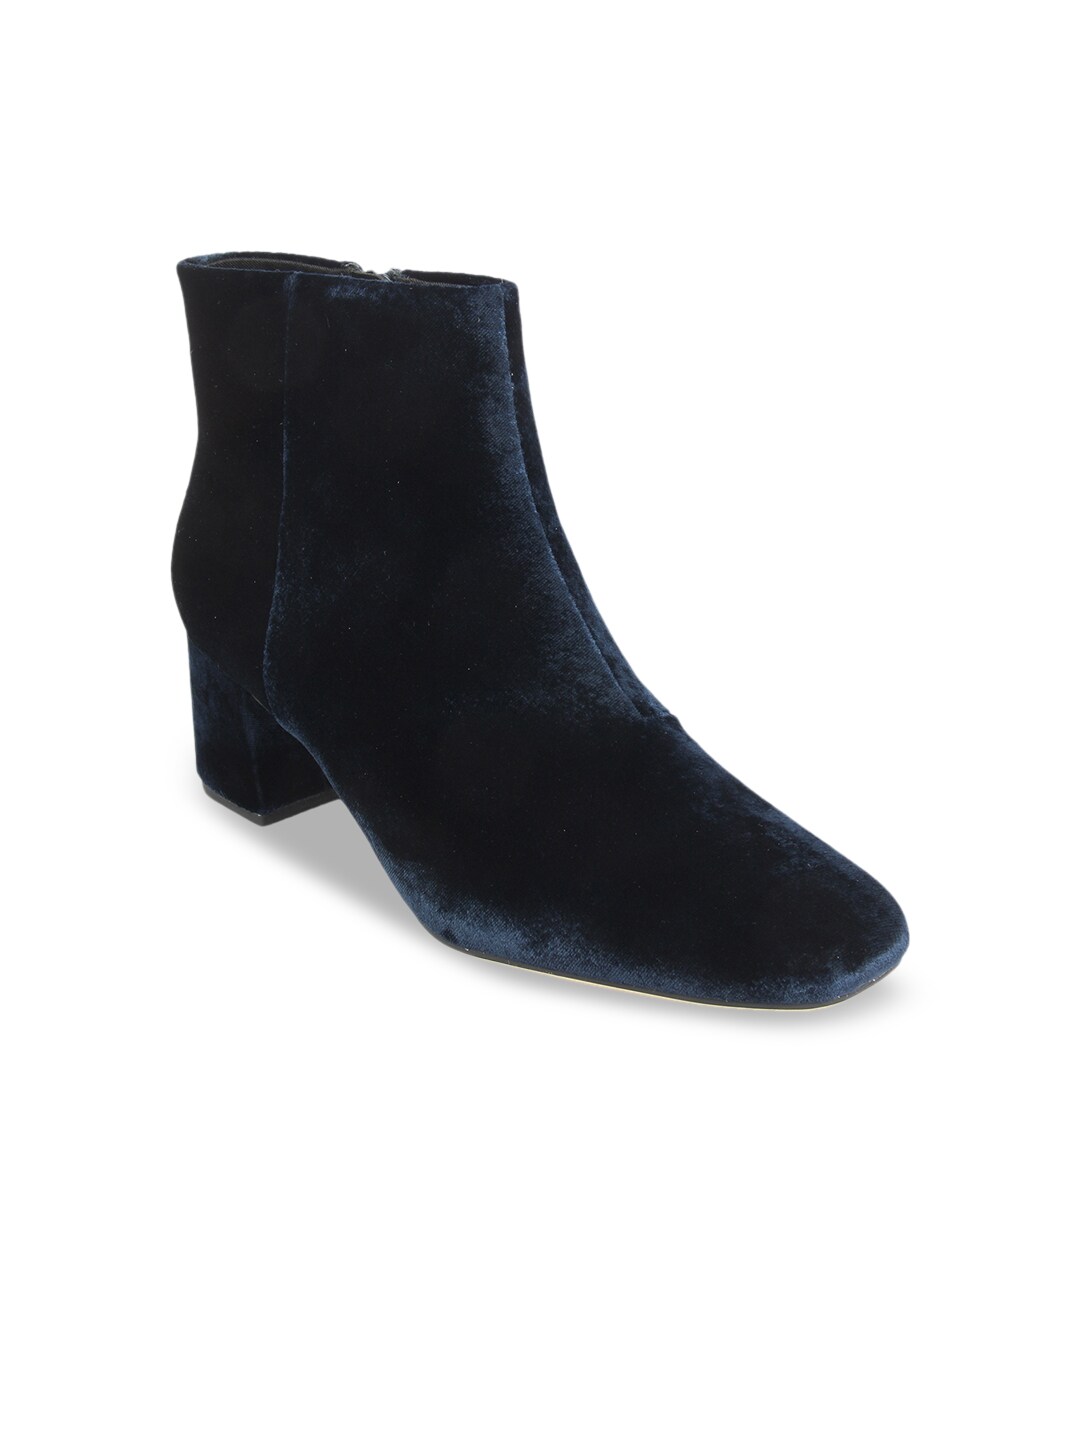 Clarks Women Navy Blue Solid Heeled Boots Price in India